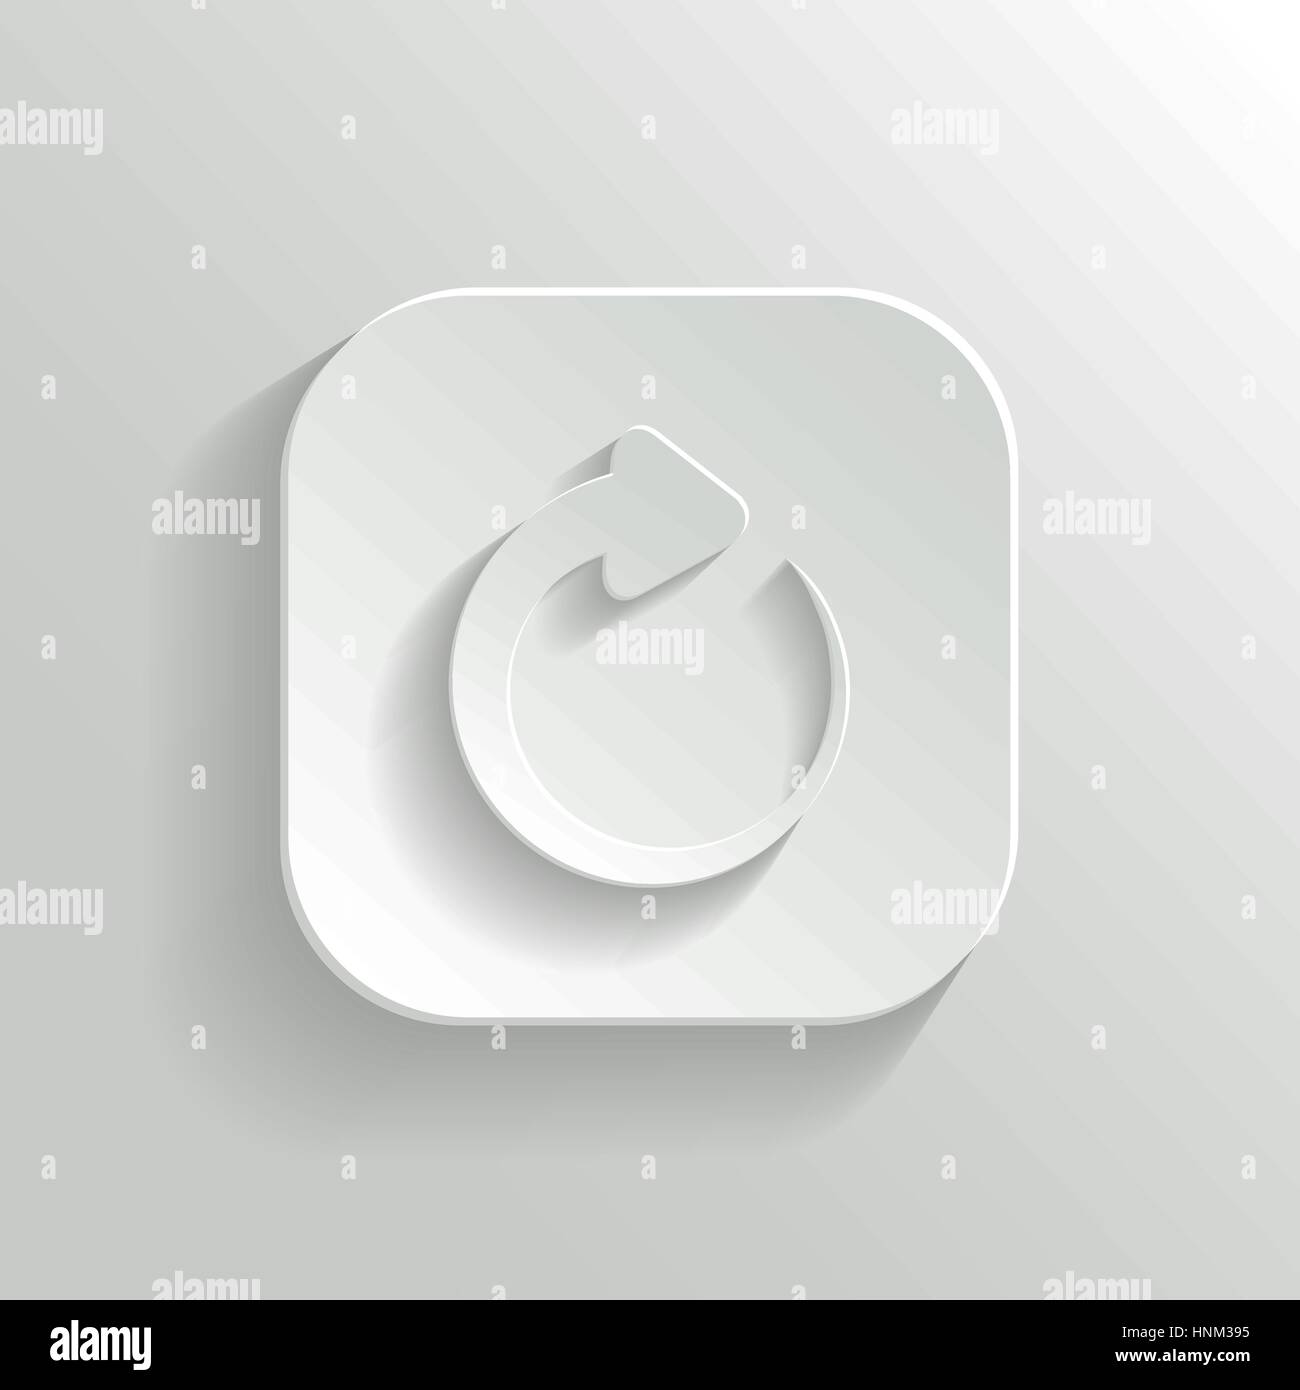 Media player icon - vector white app button with shadow Stock Vector